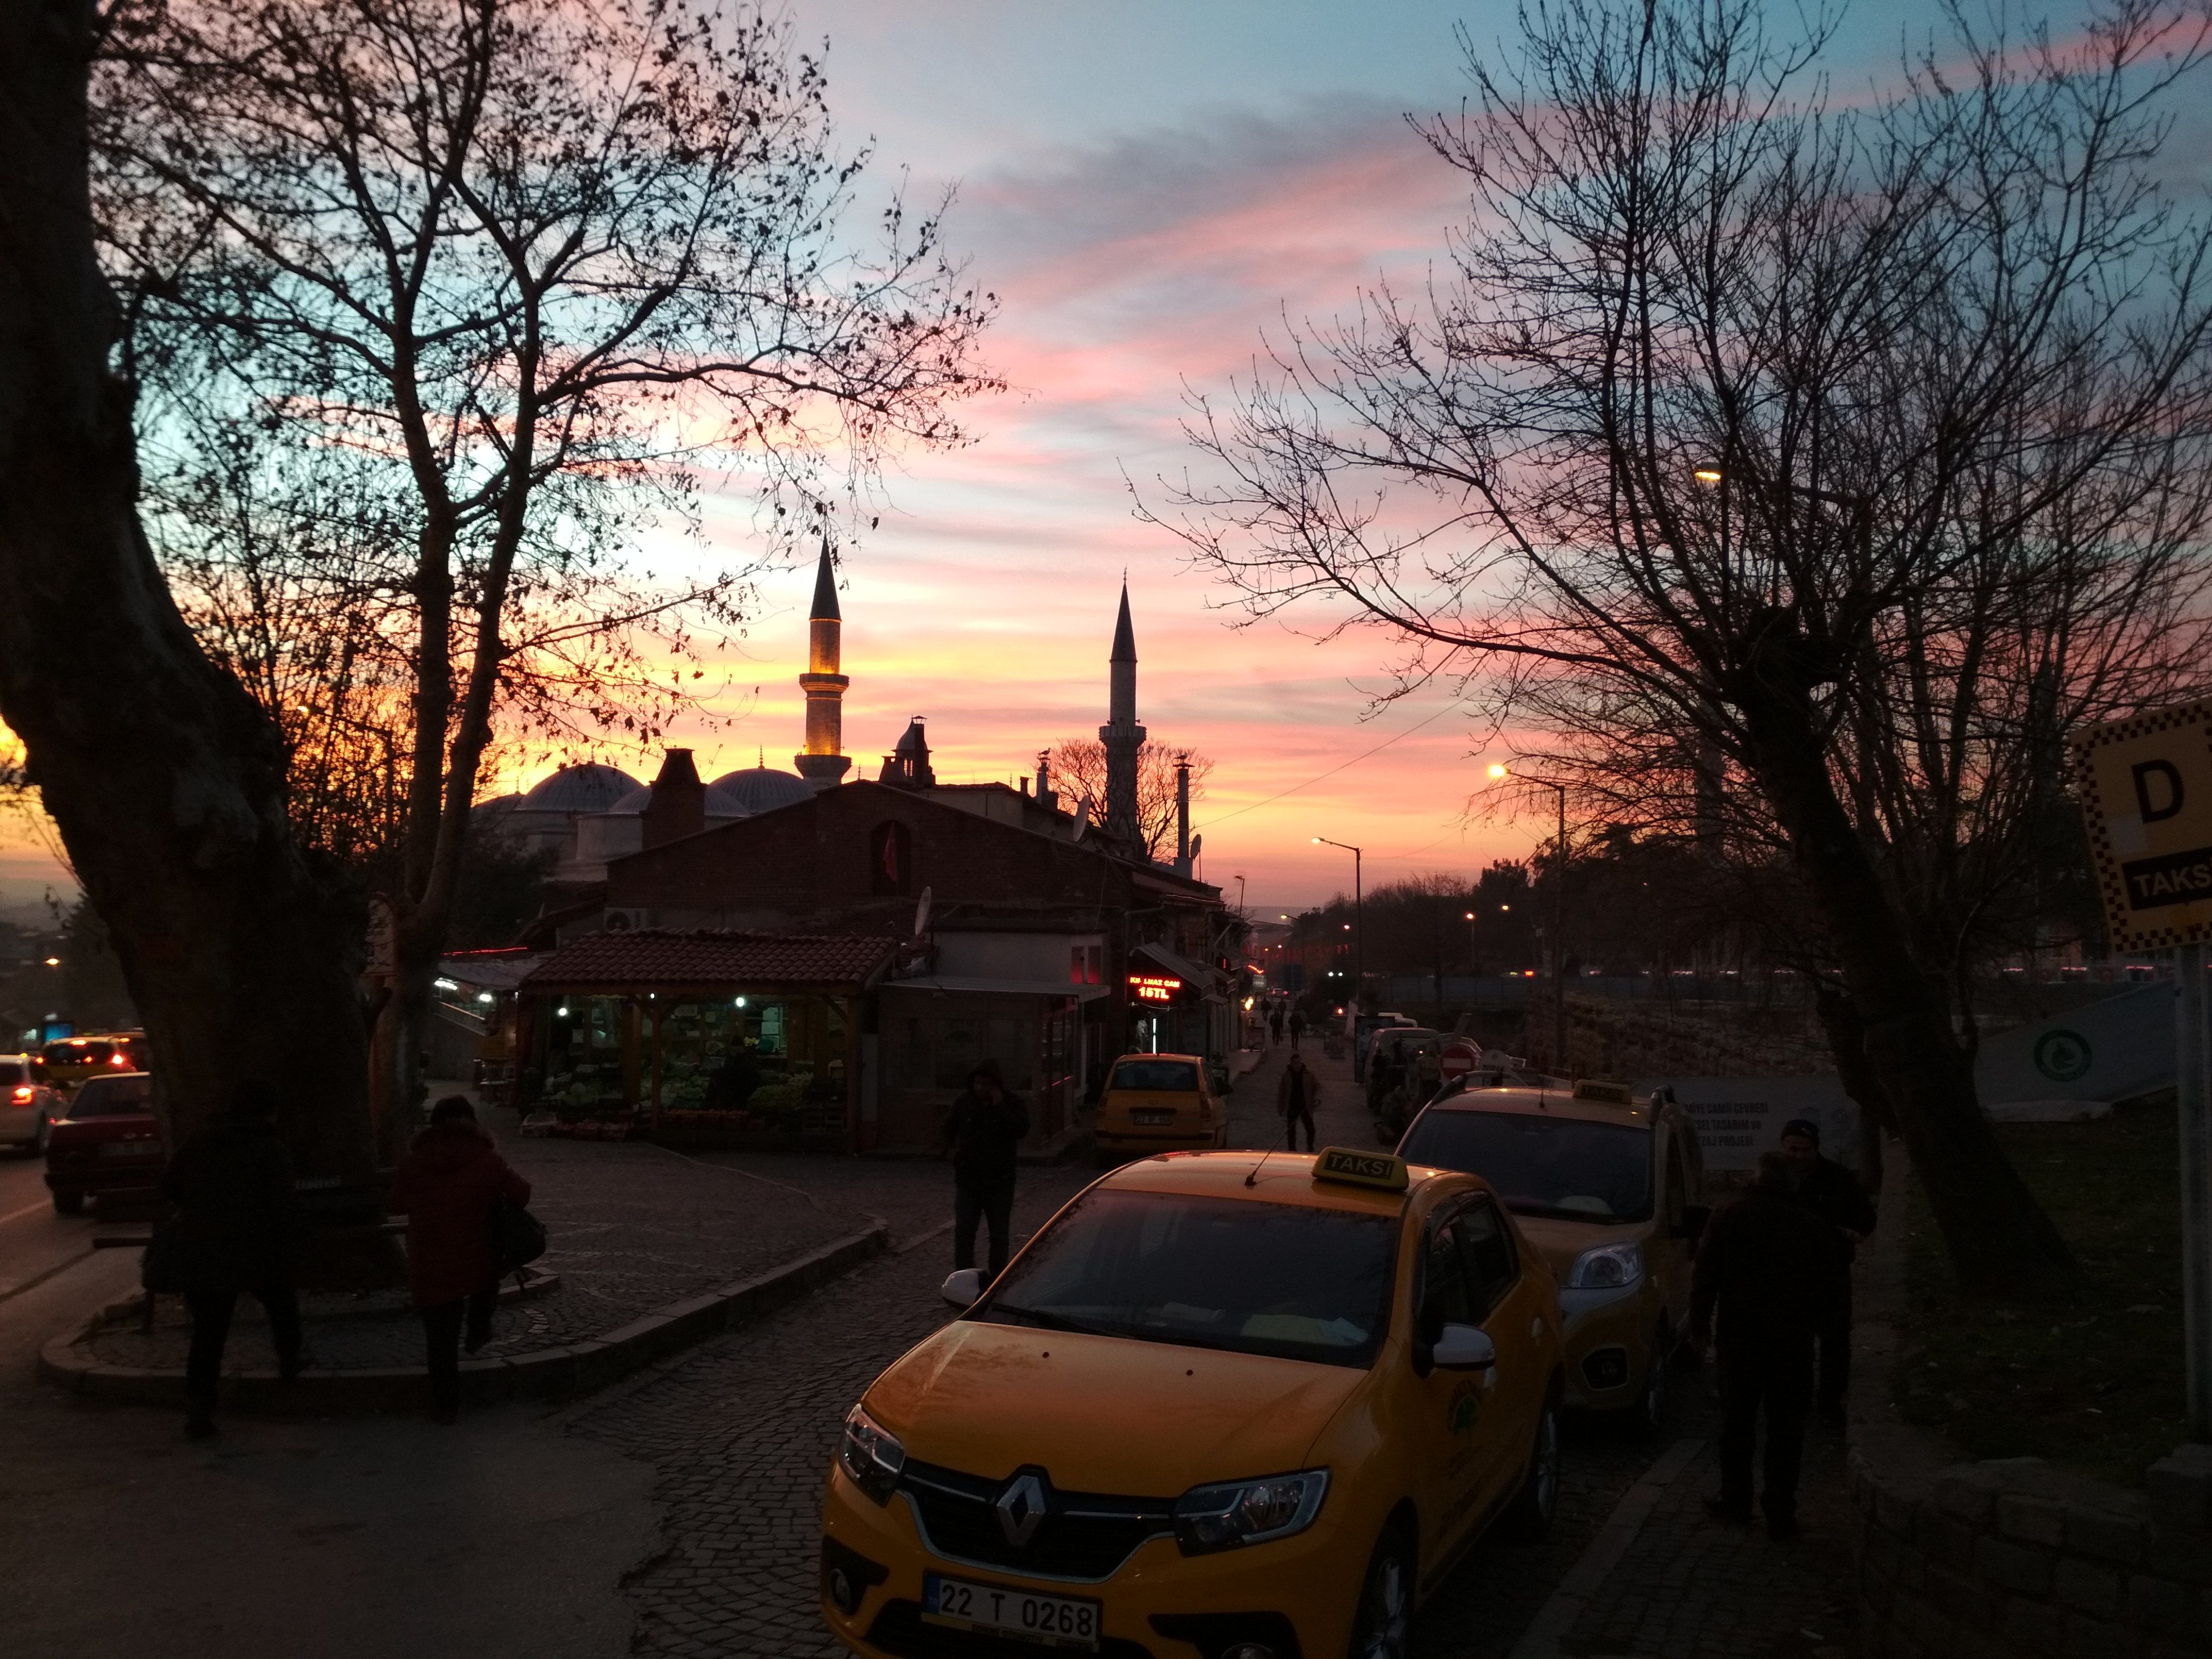 Caption: A photo of the sky in yellow, orange, pink, and purple colours at sunset in Edirne, Turkey. The light is reflected off a bright yellow taxi in the foreground. (Local Guide @DeniGu)